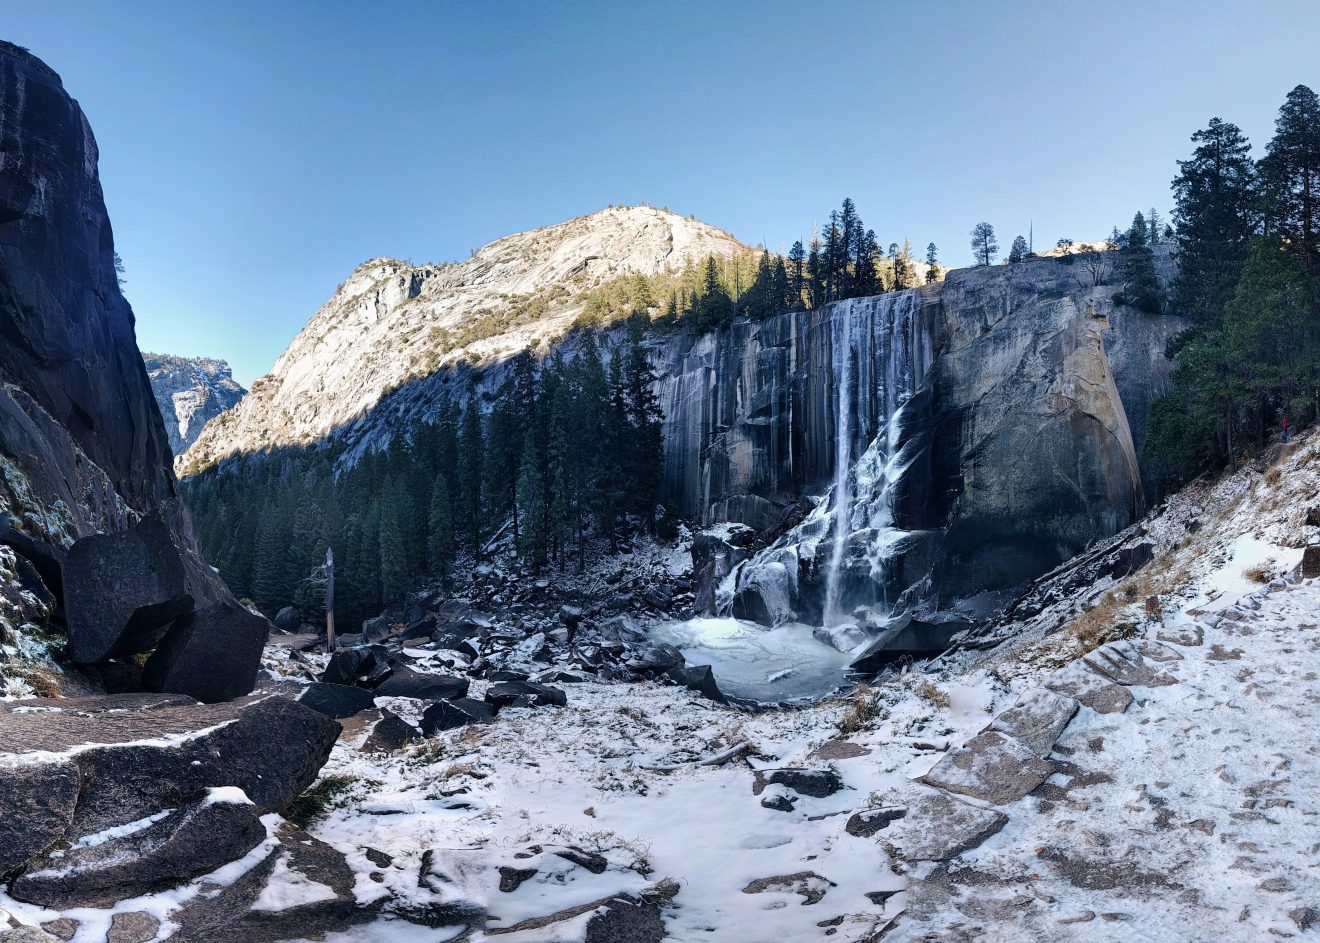 Vernal Falls in Yosemite covered in ice and snow in the winter.